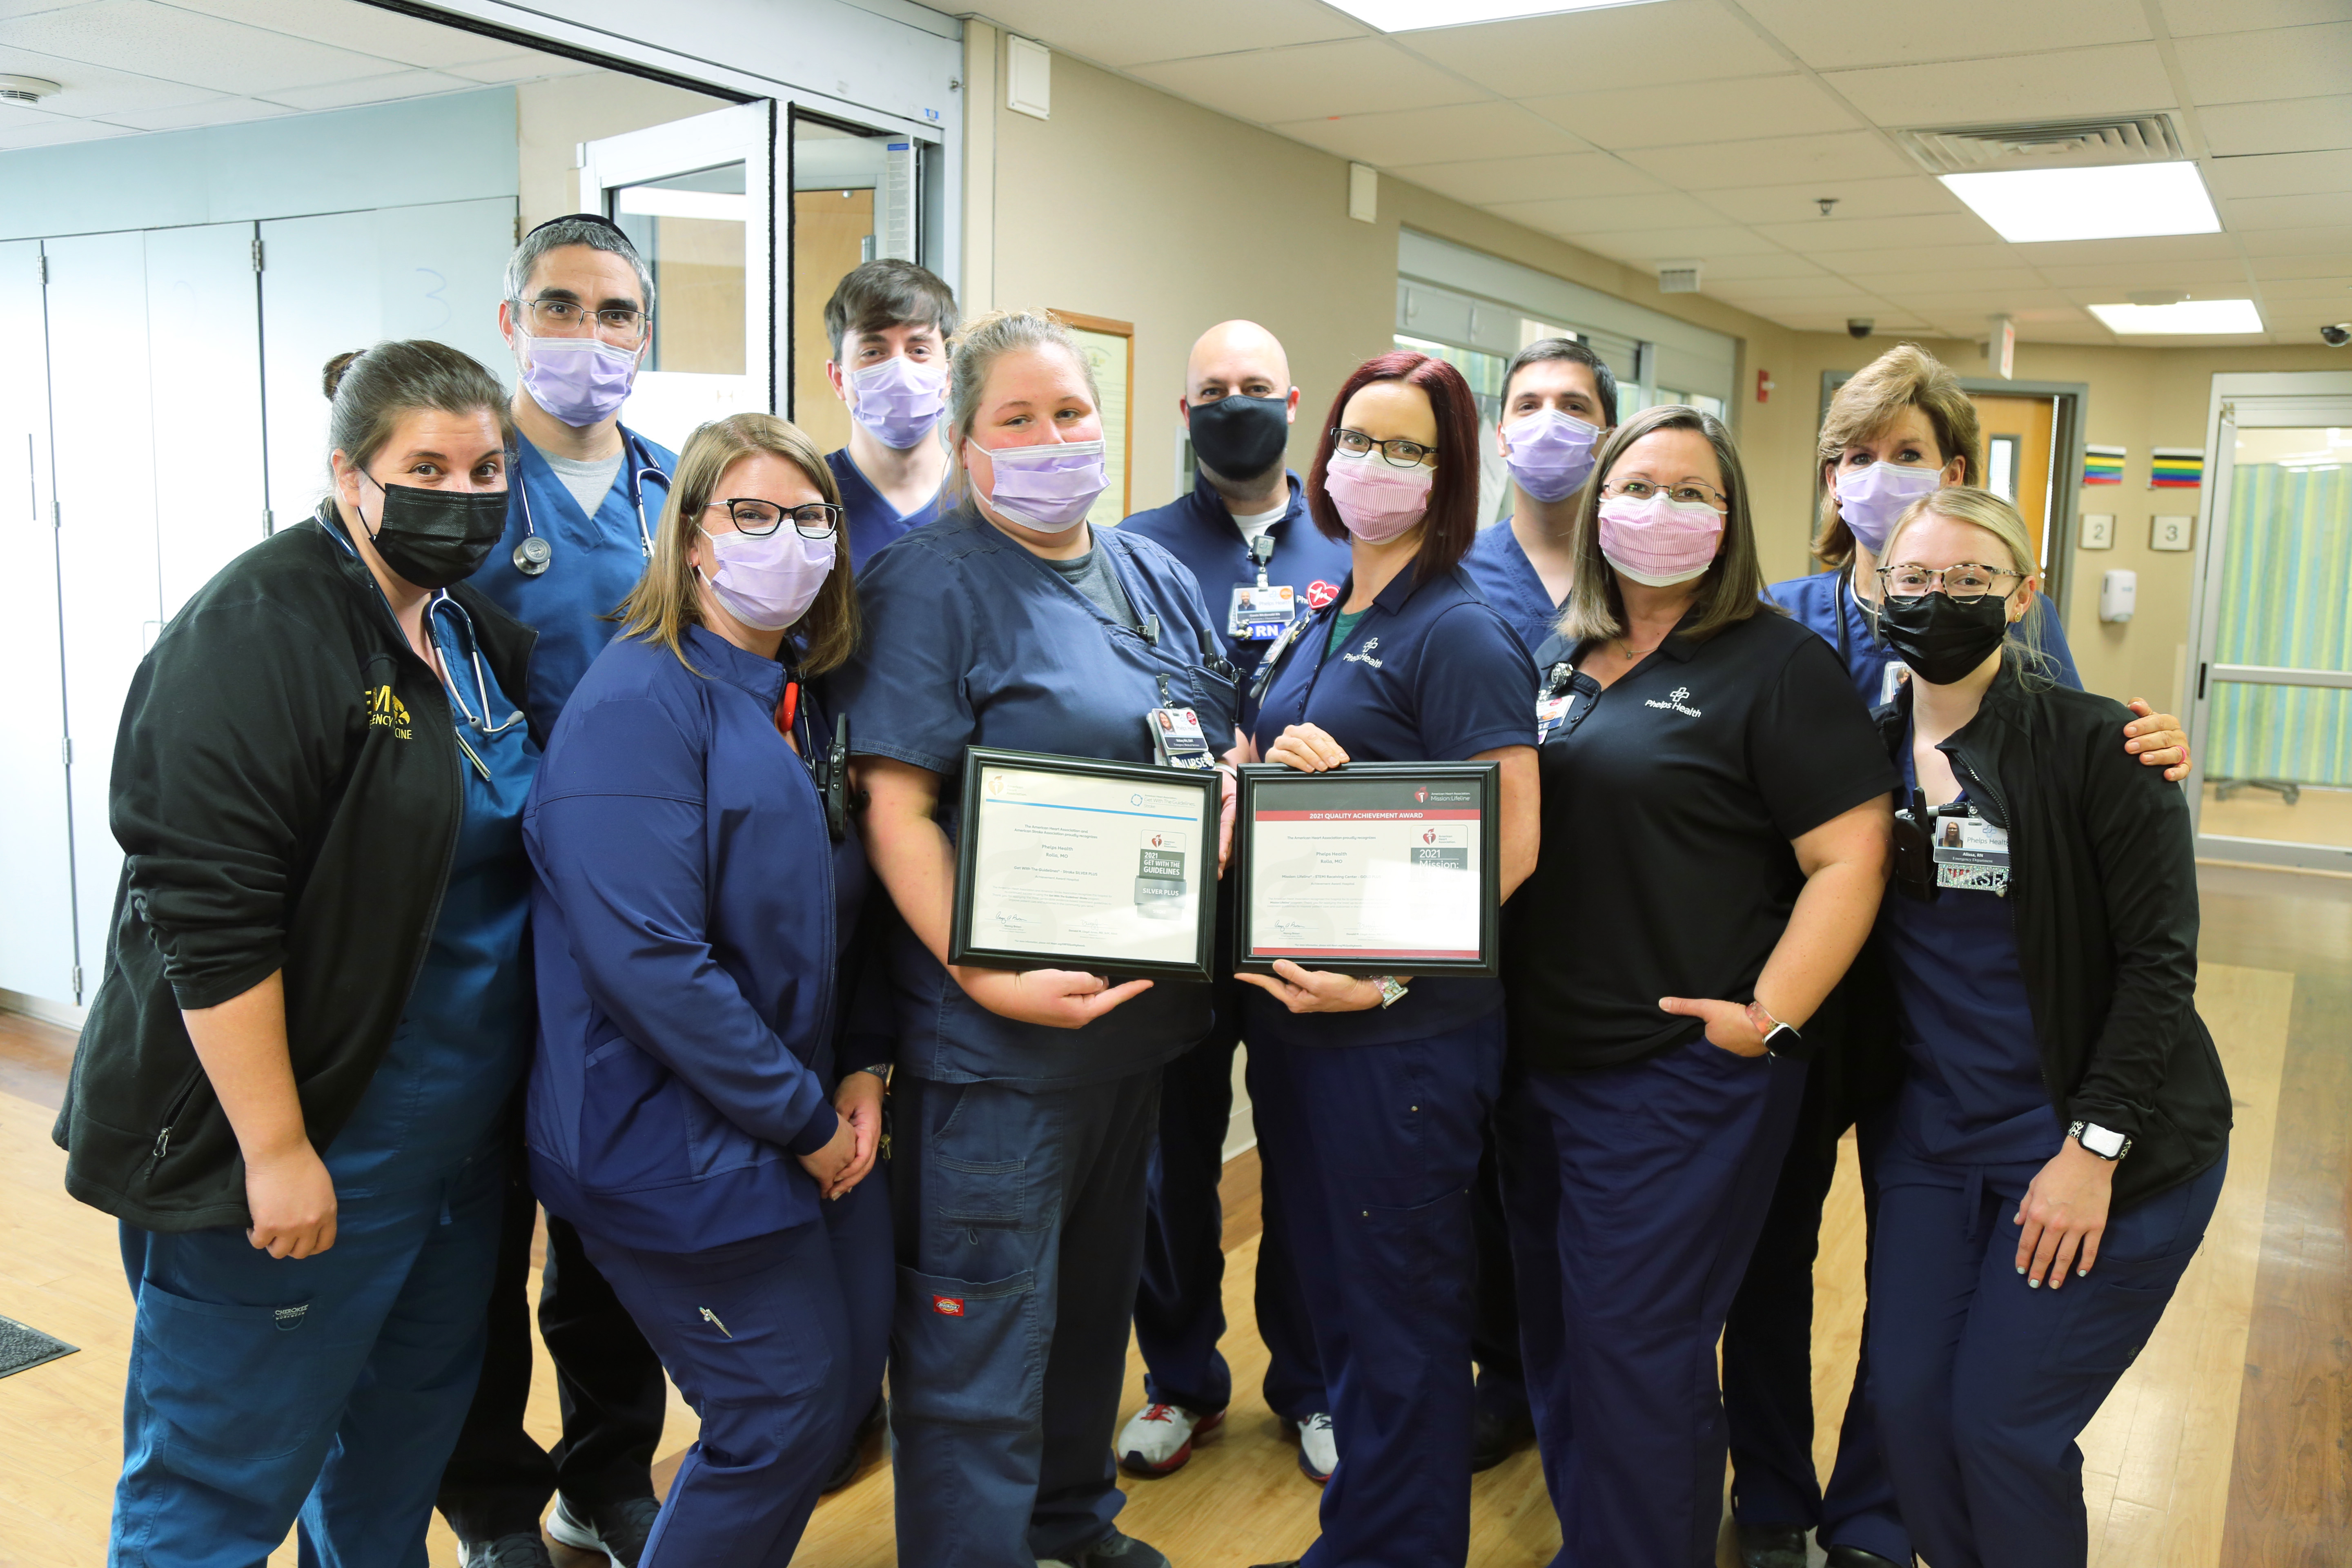 Emergency Department staff with AHA awards